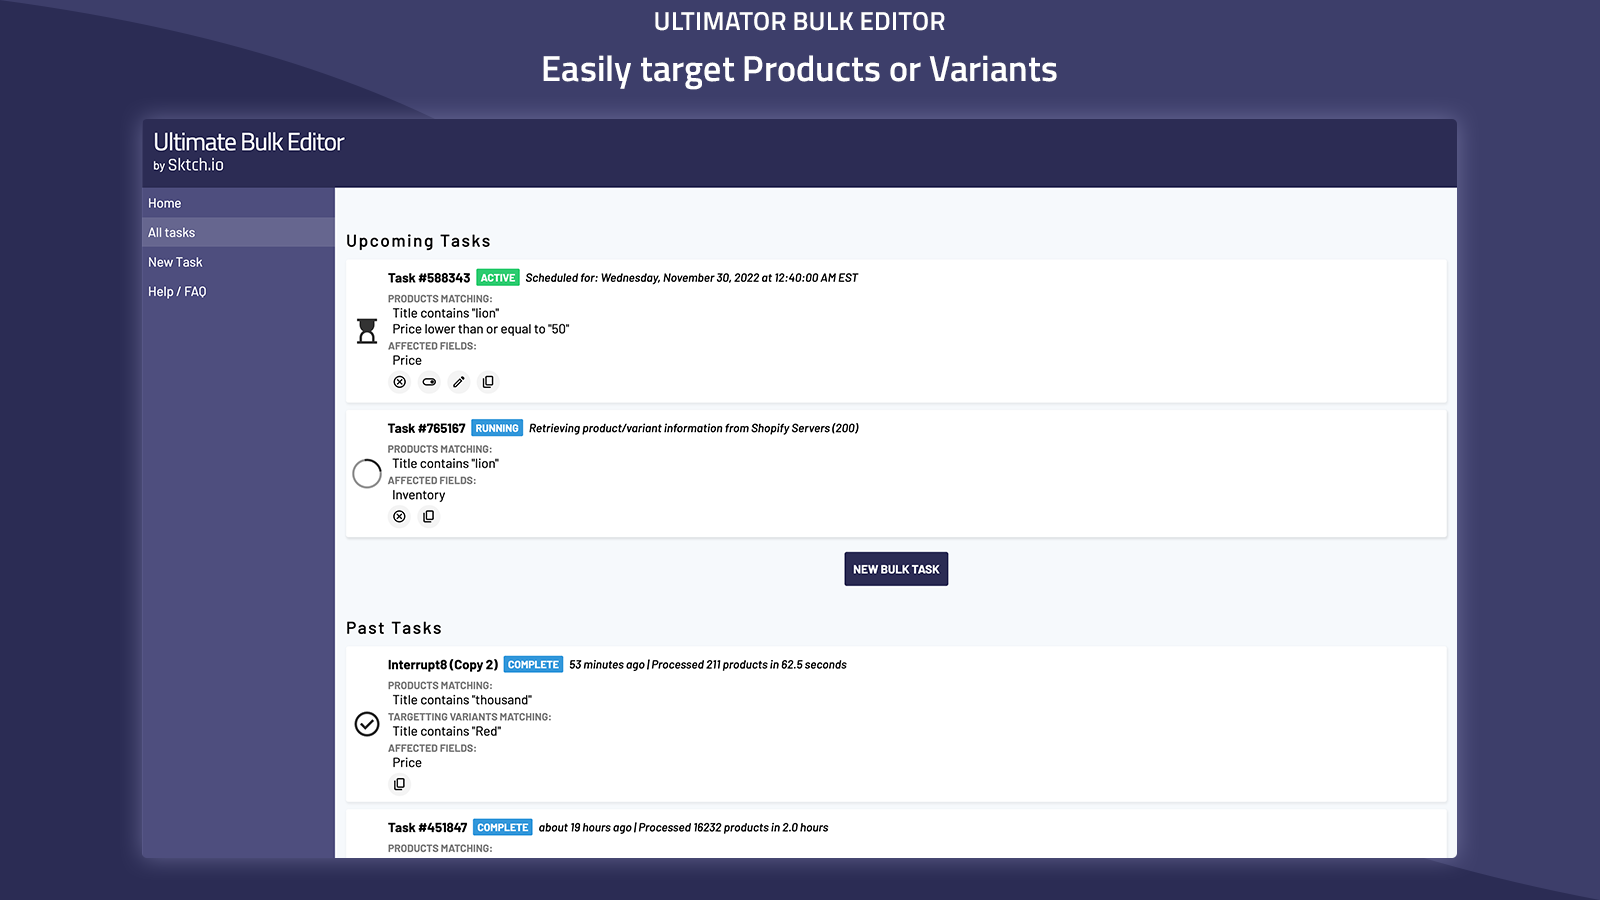 Easily target Products or Variants